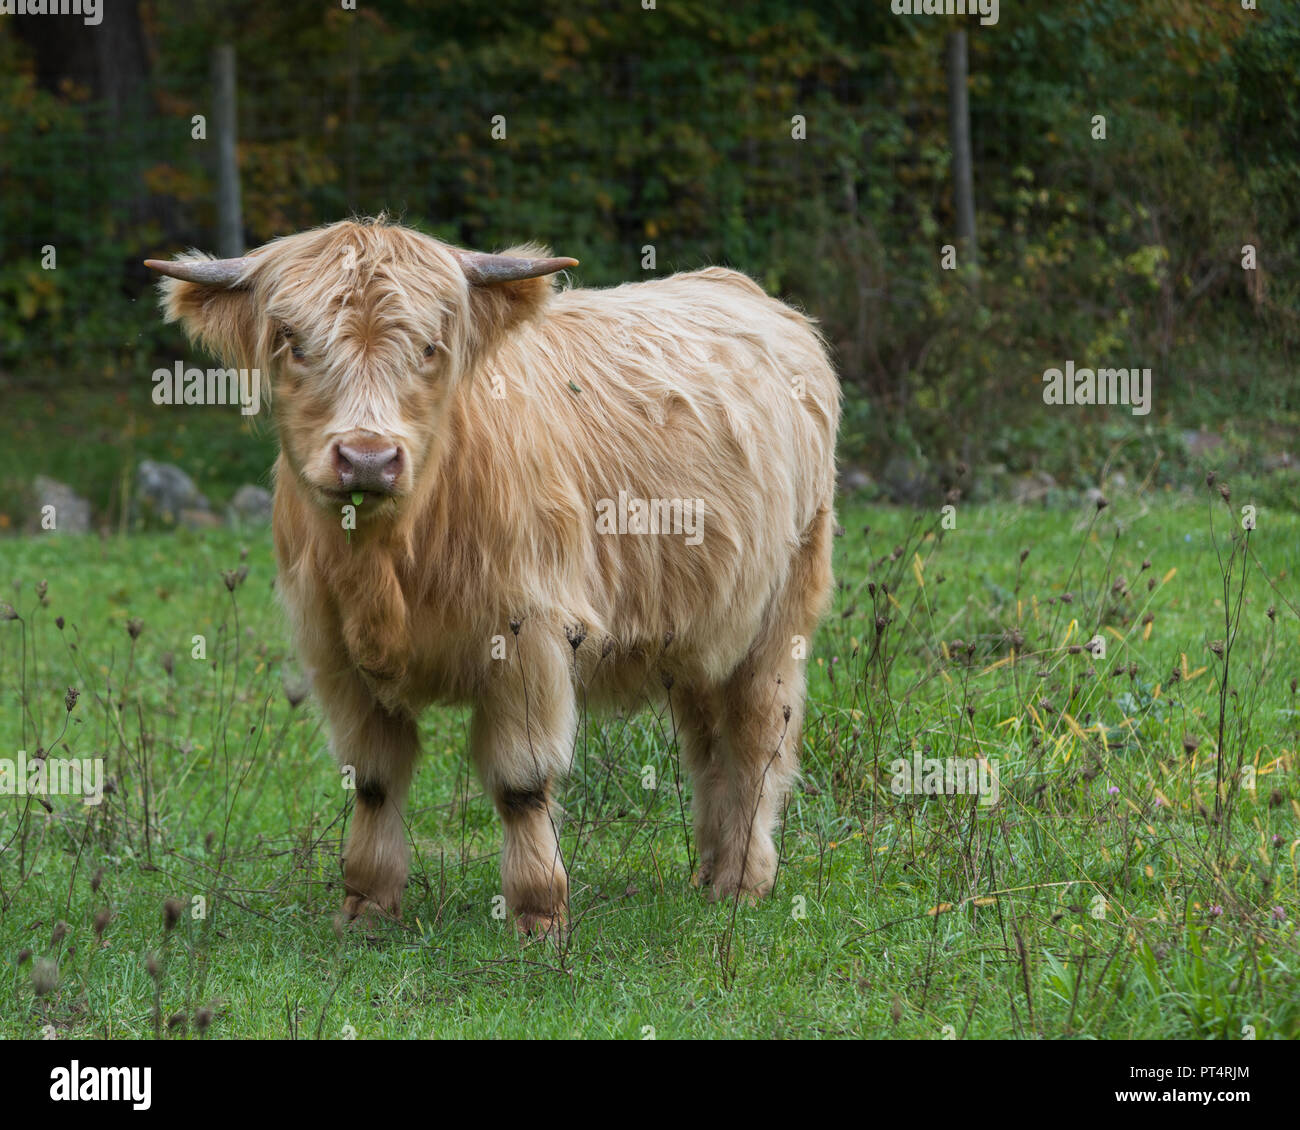 Highland cow heifer standing in grassy field on damp day with grass in mouth Stock Photo